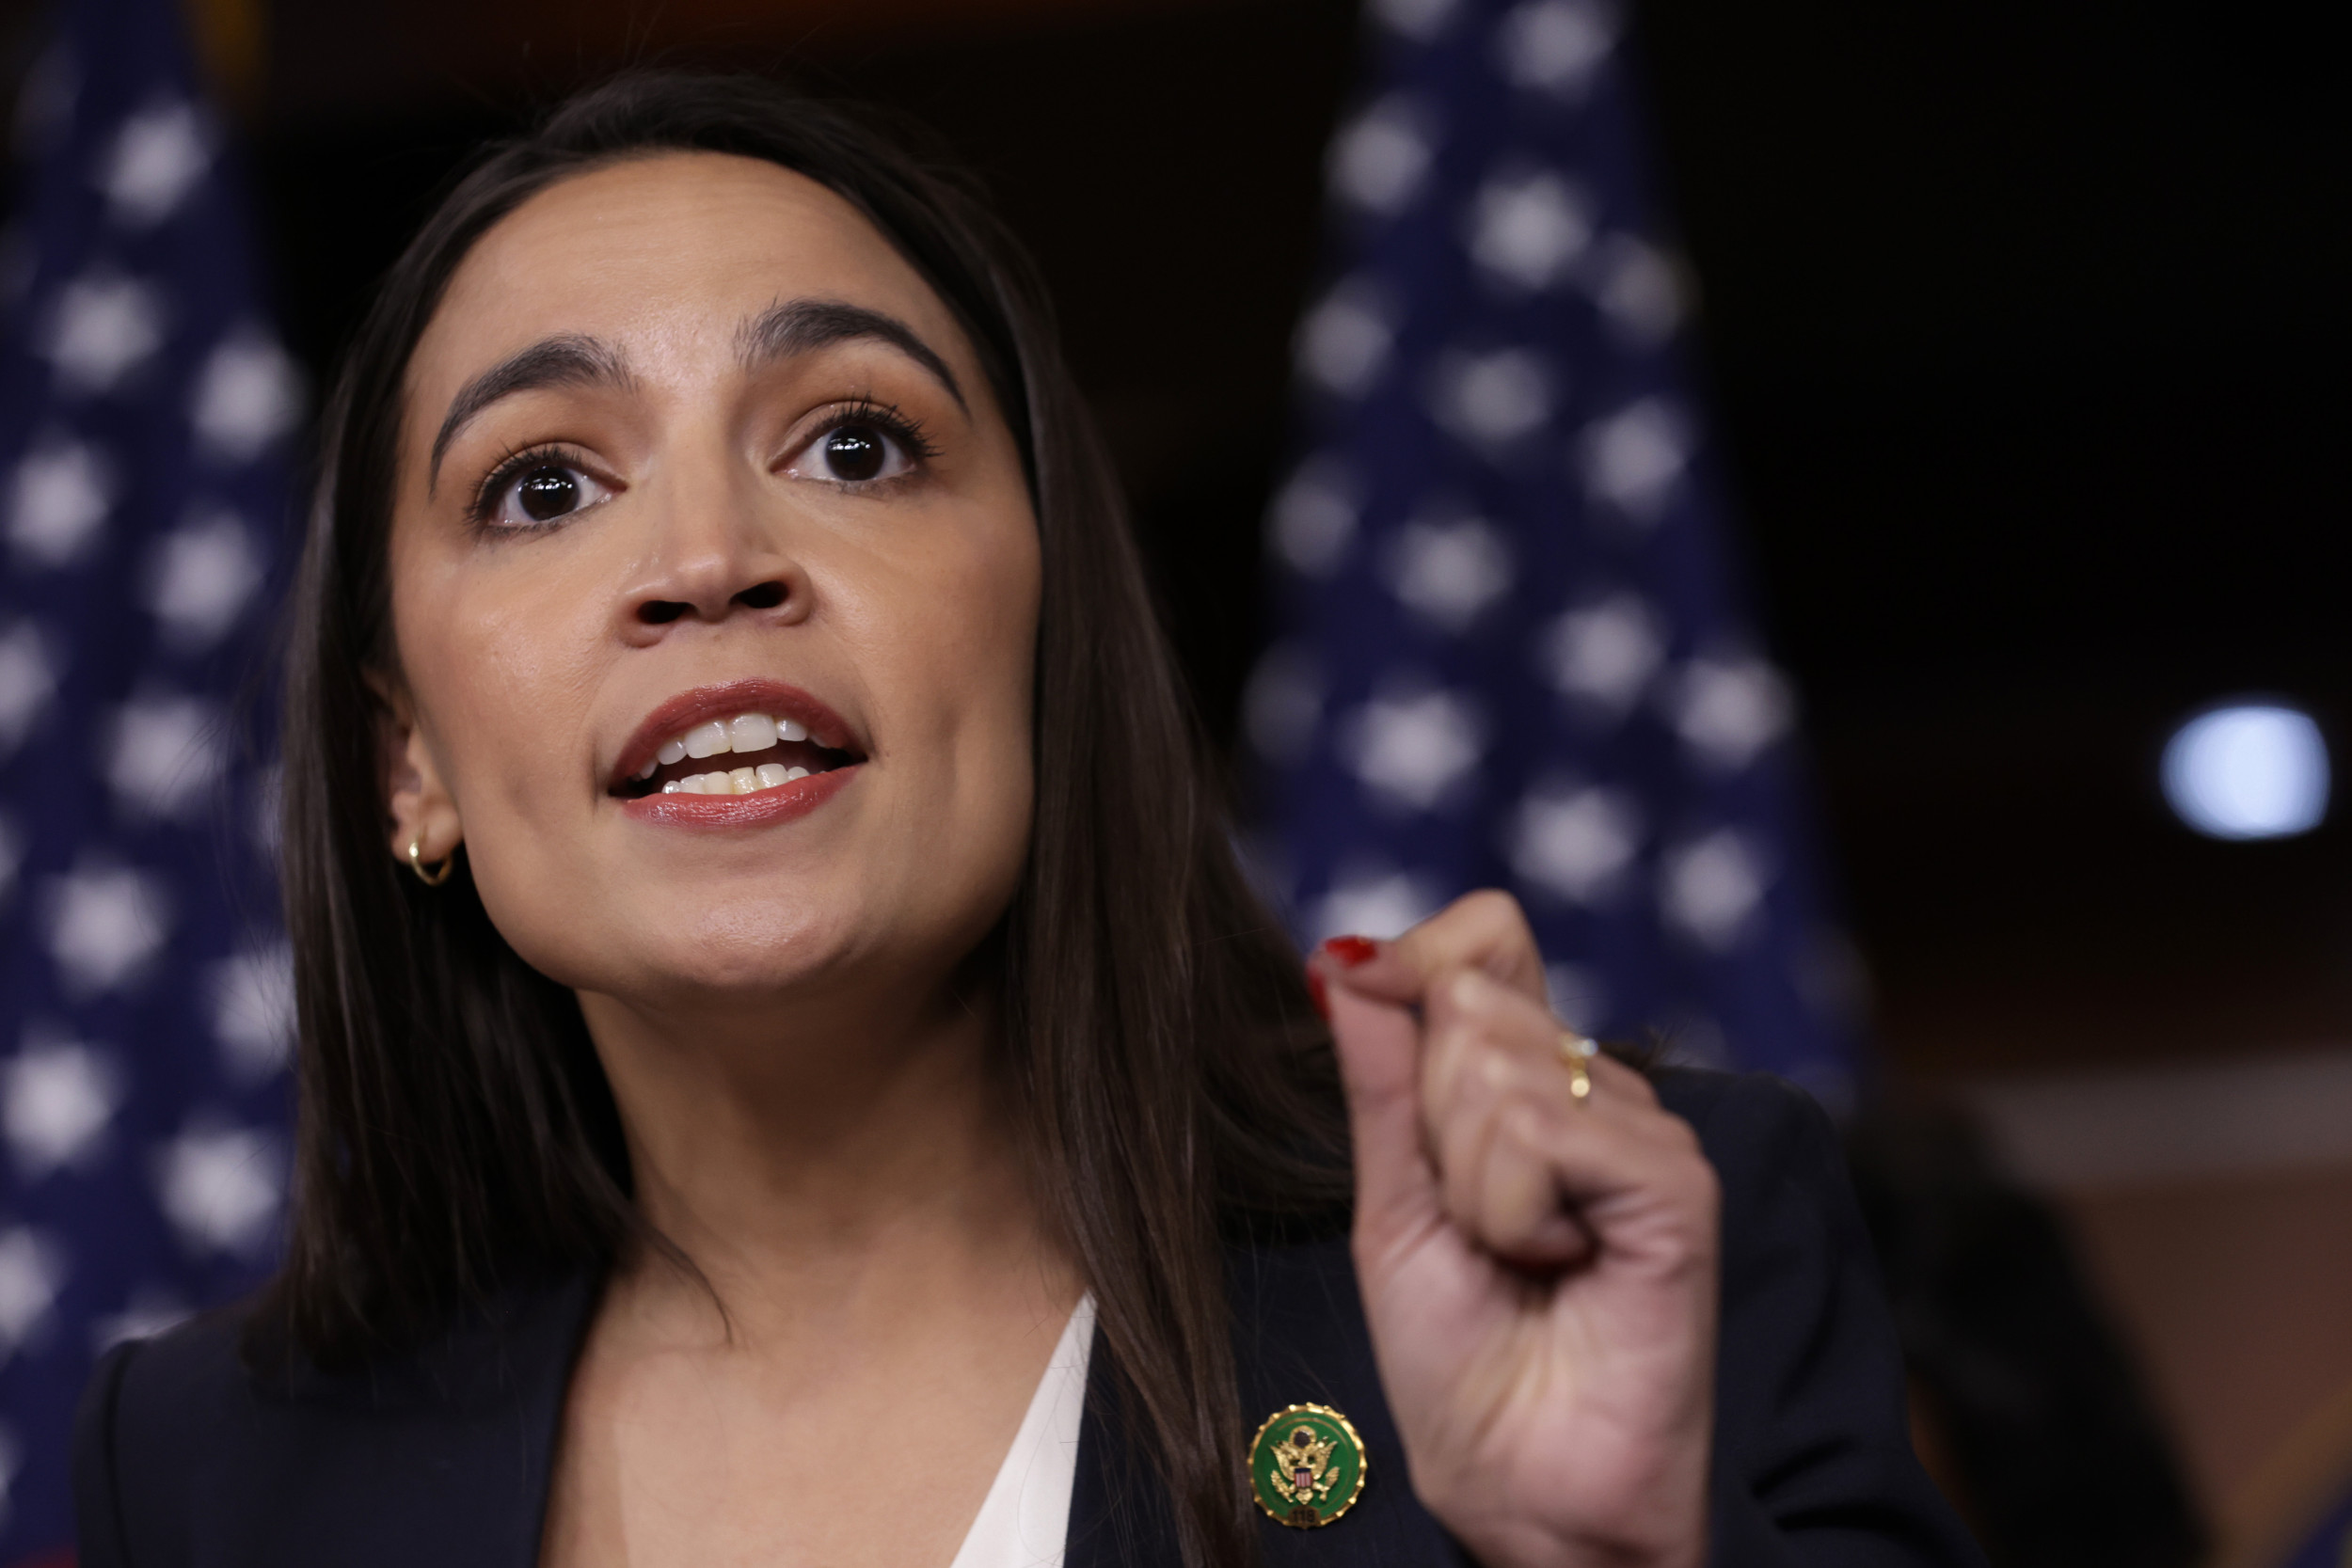 AOC’s warning to Chief Justice Roberts amid calls for ethics reform